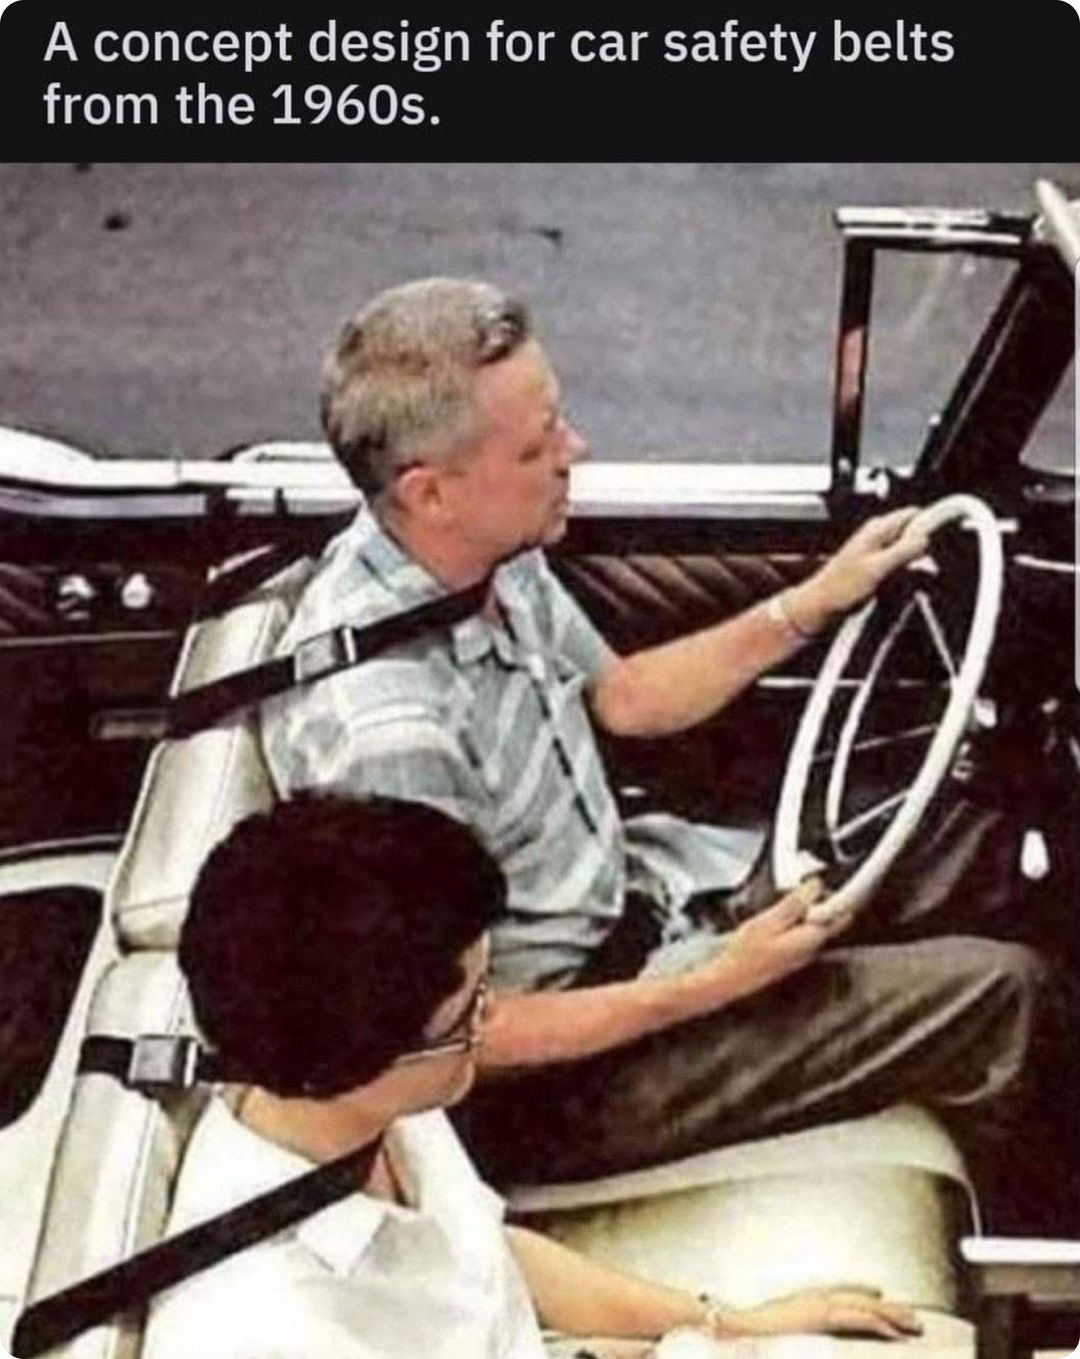 A concept seat belt design from the 1960s which went around people's necks.